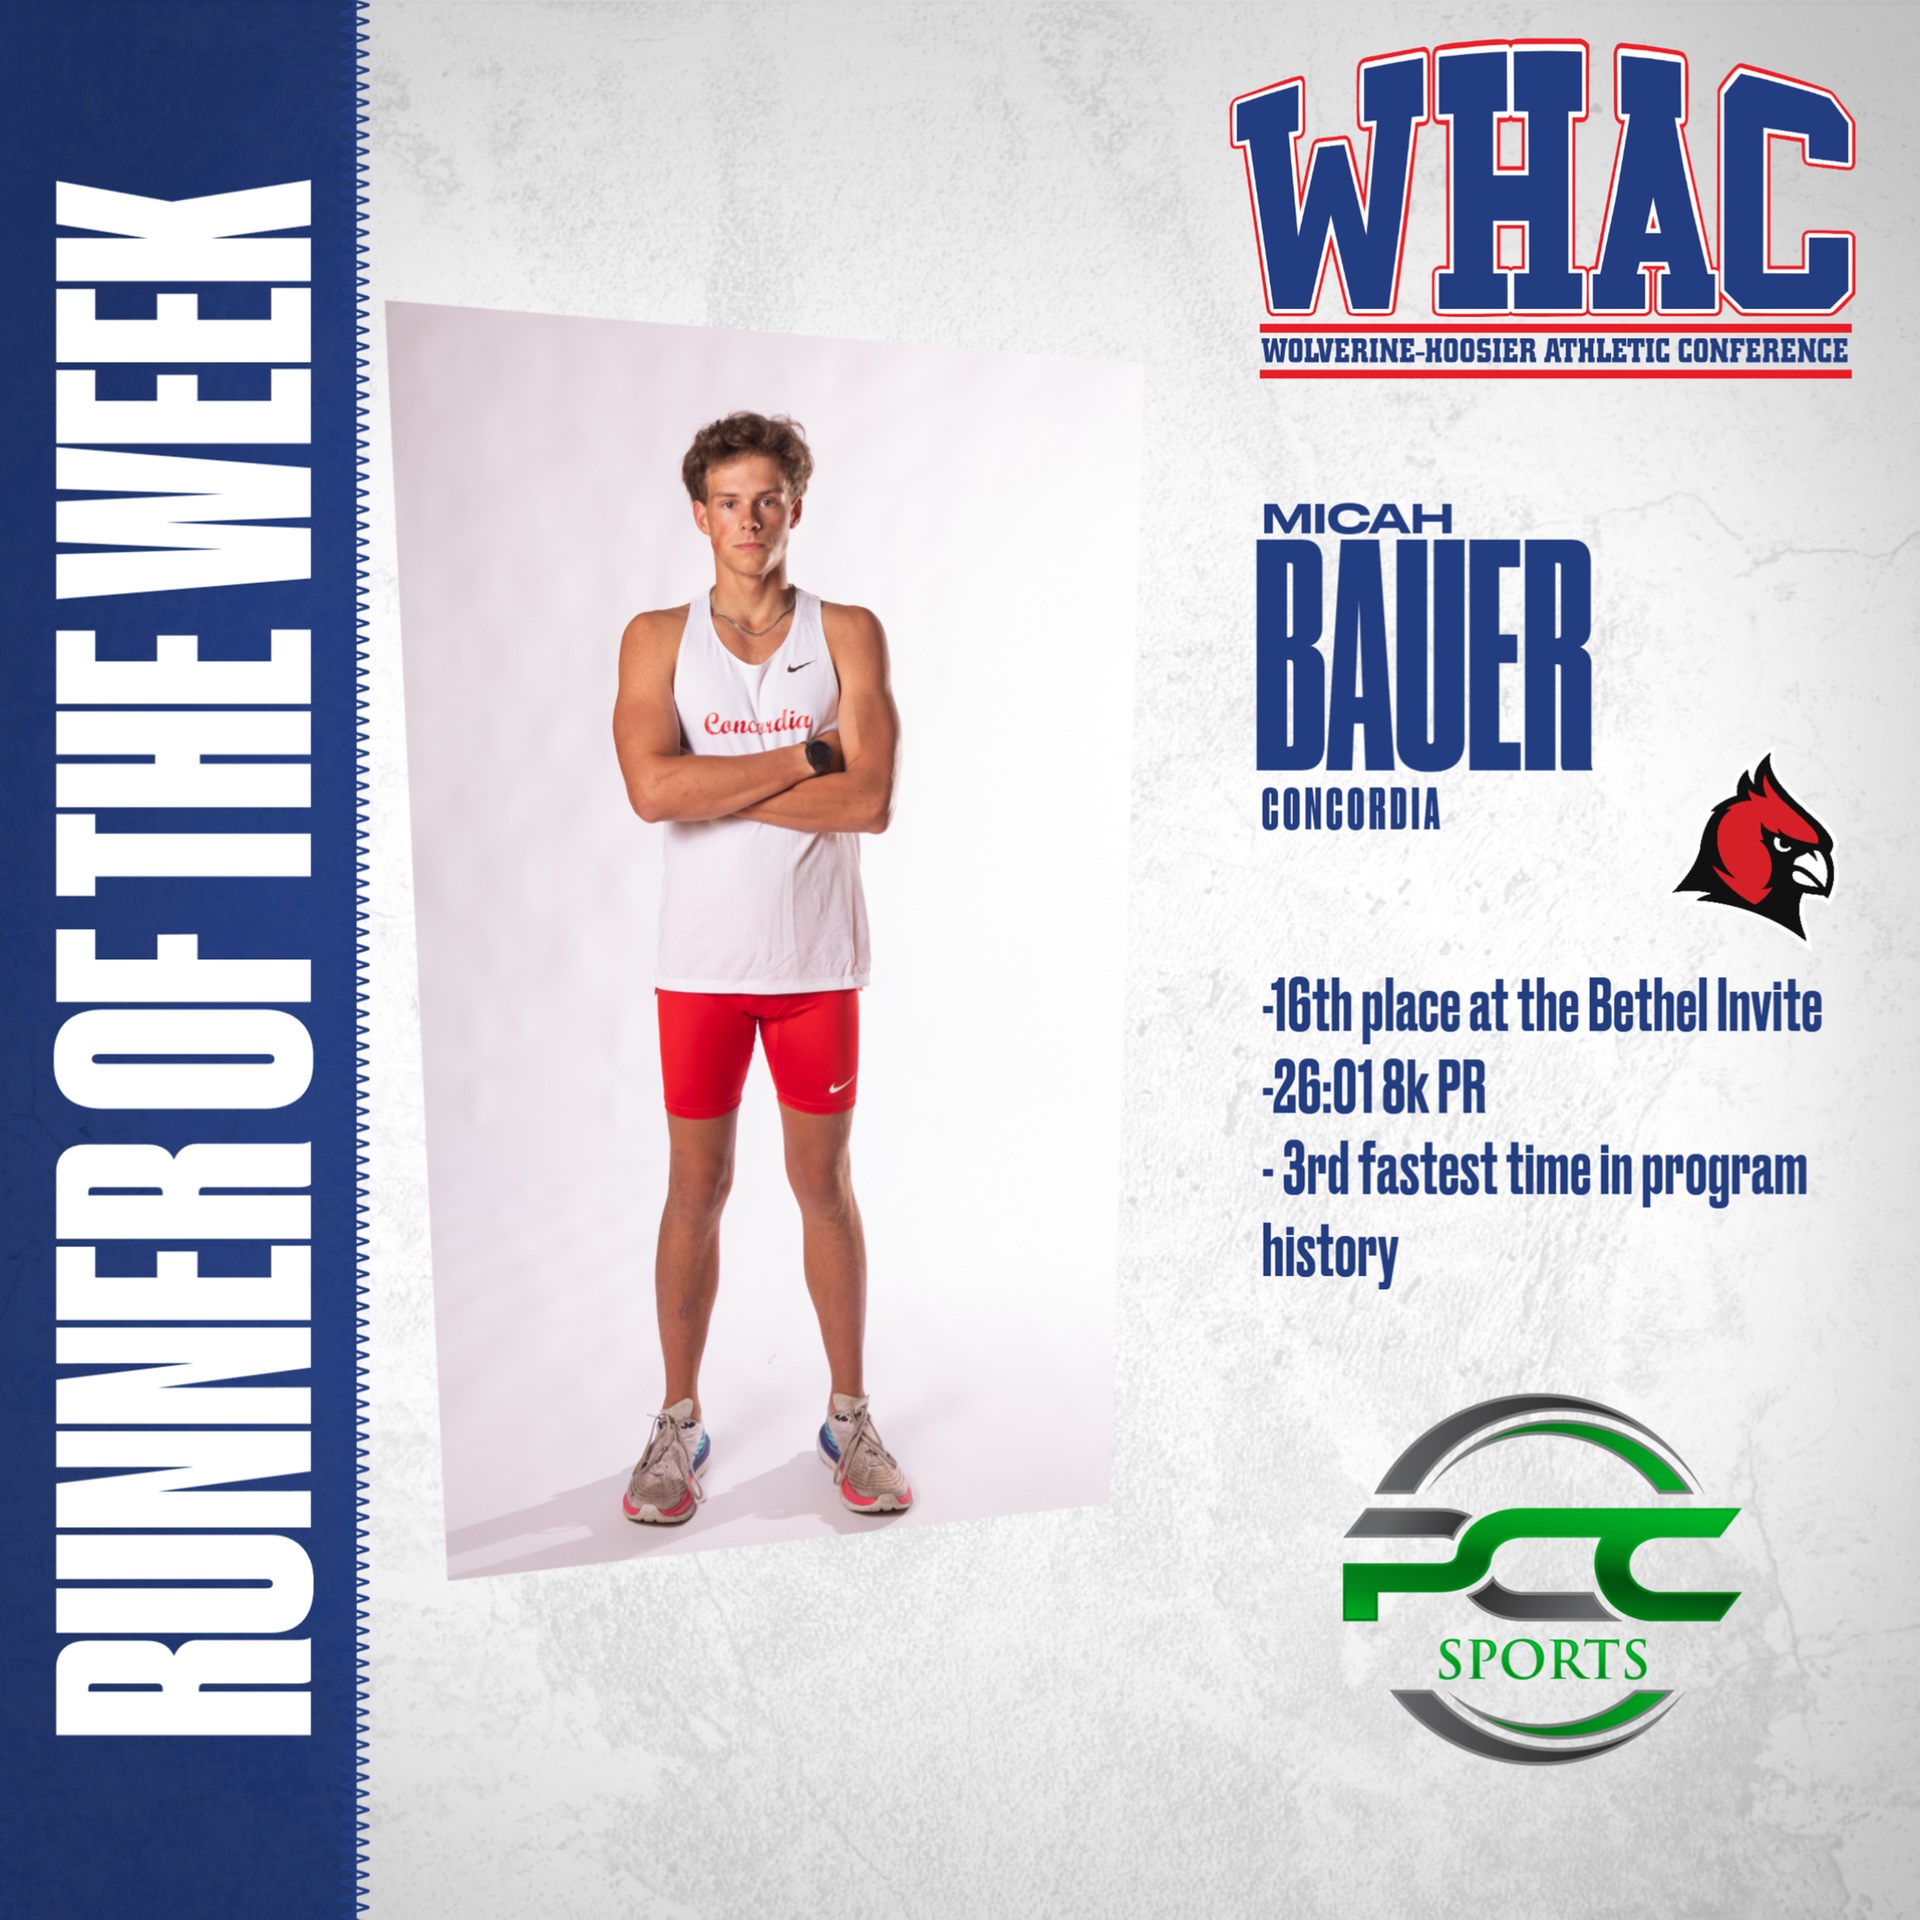 Concordia's Bauer named Runner of the Week